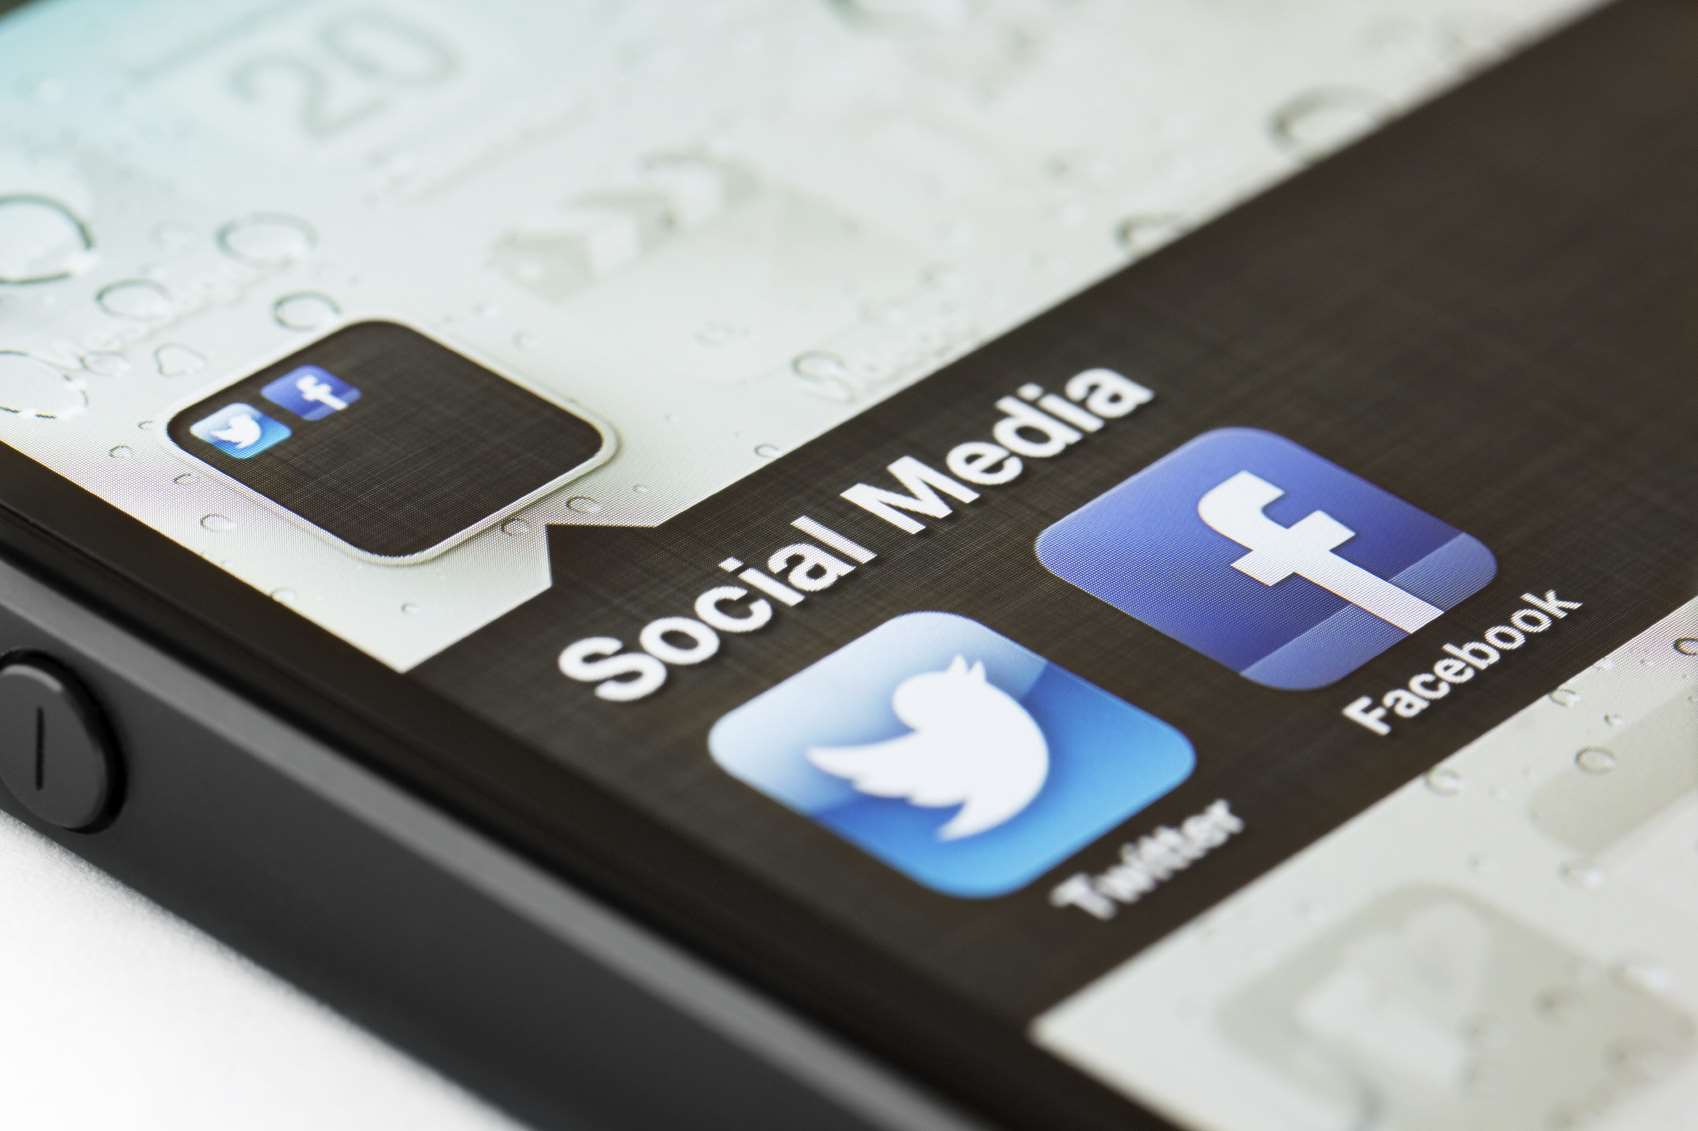 Can your business afford to be missing out on social media?